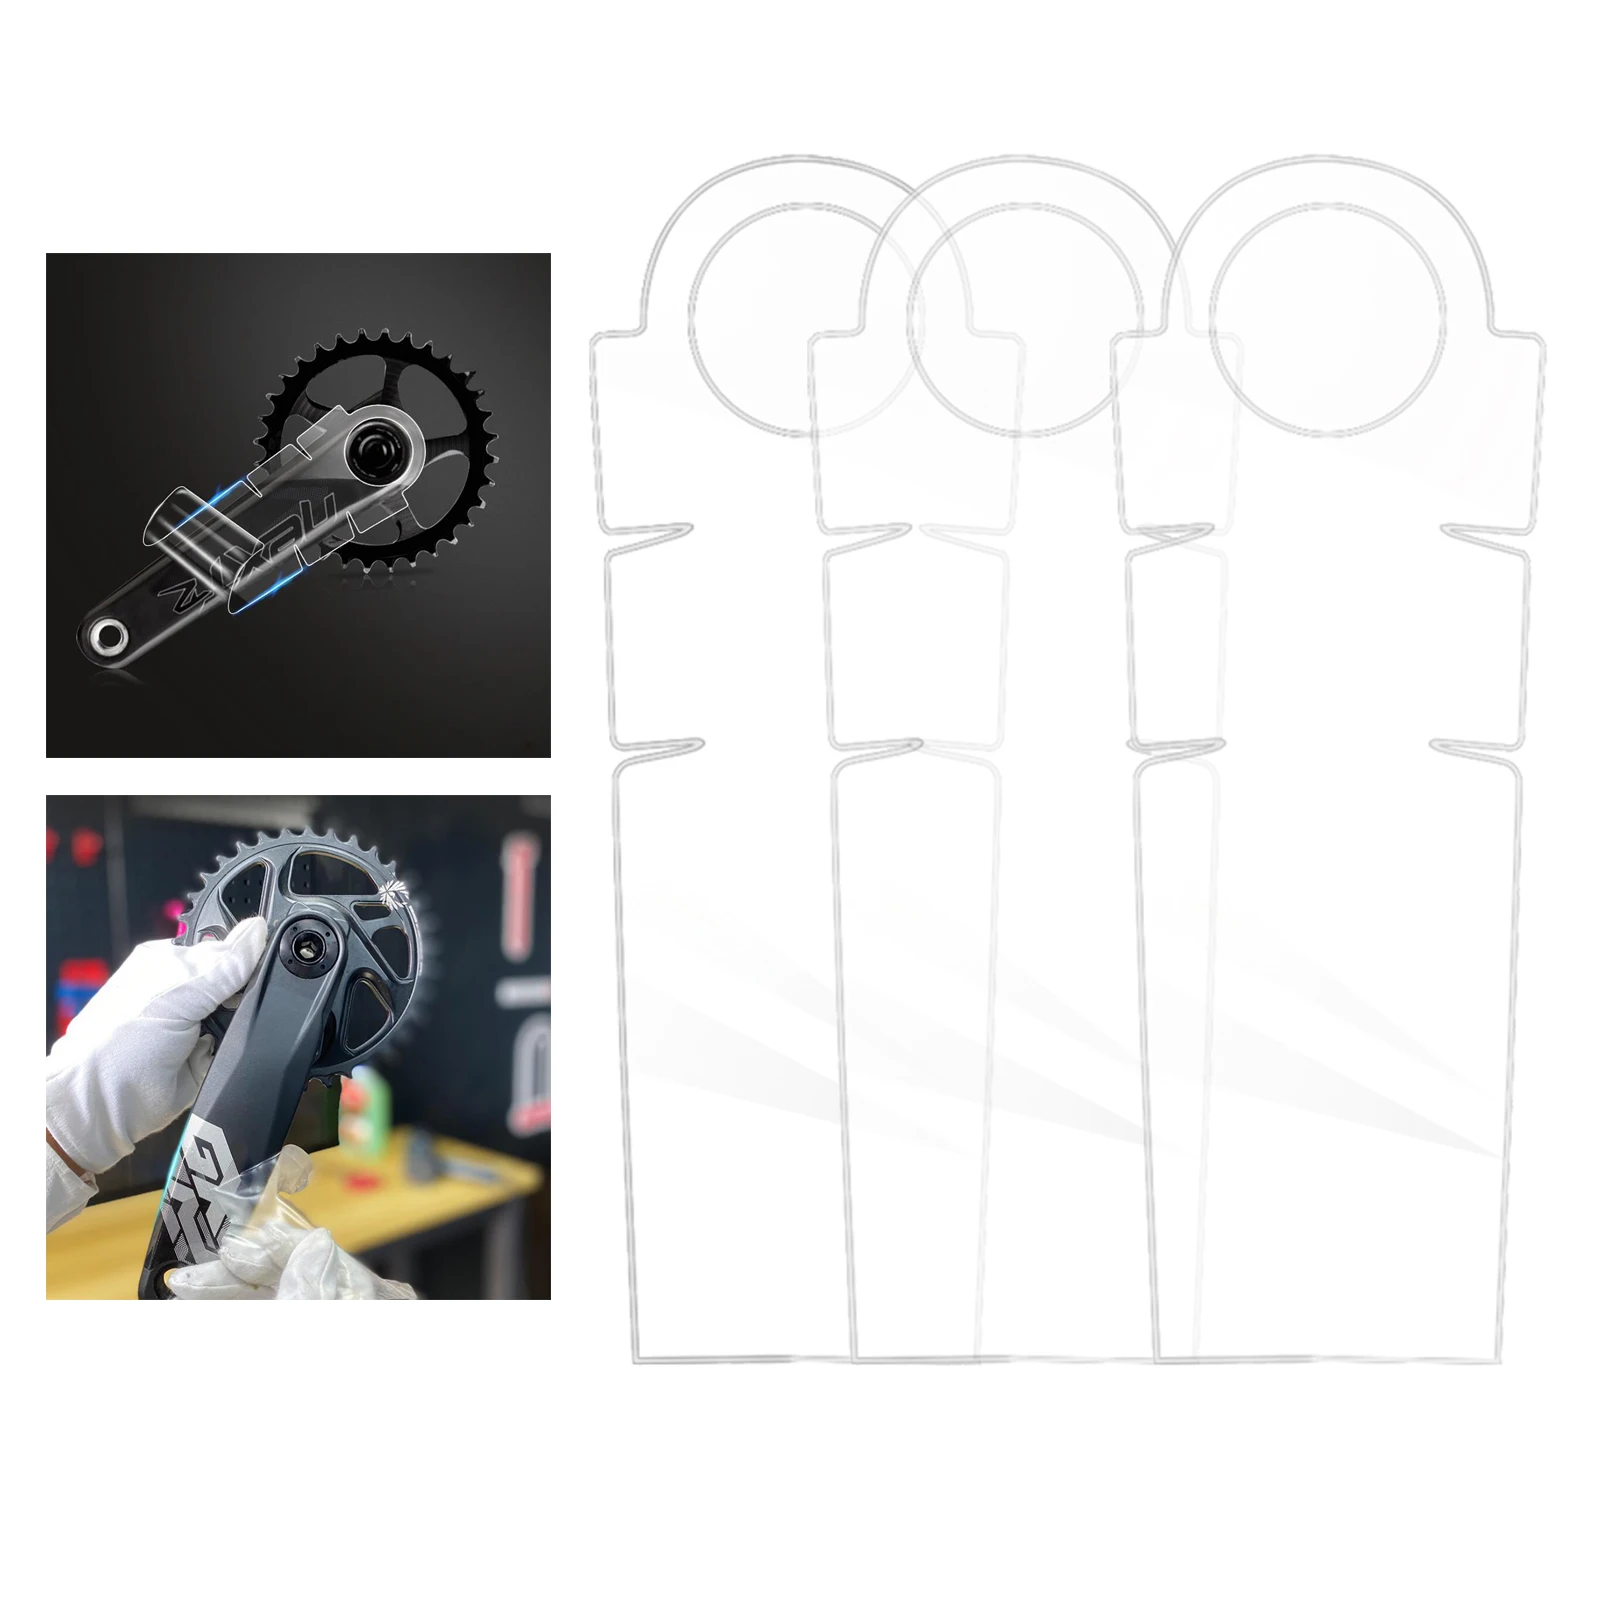 3 Pieces Bike Crankset Cover Universal Crank Arms Guard Adhesive Sleeves